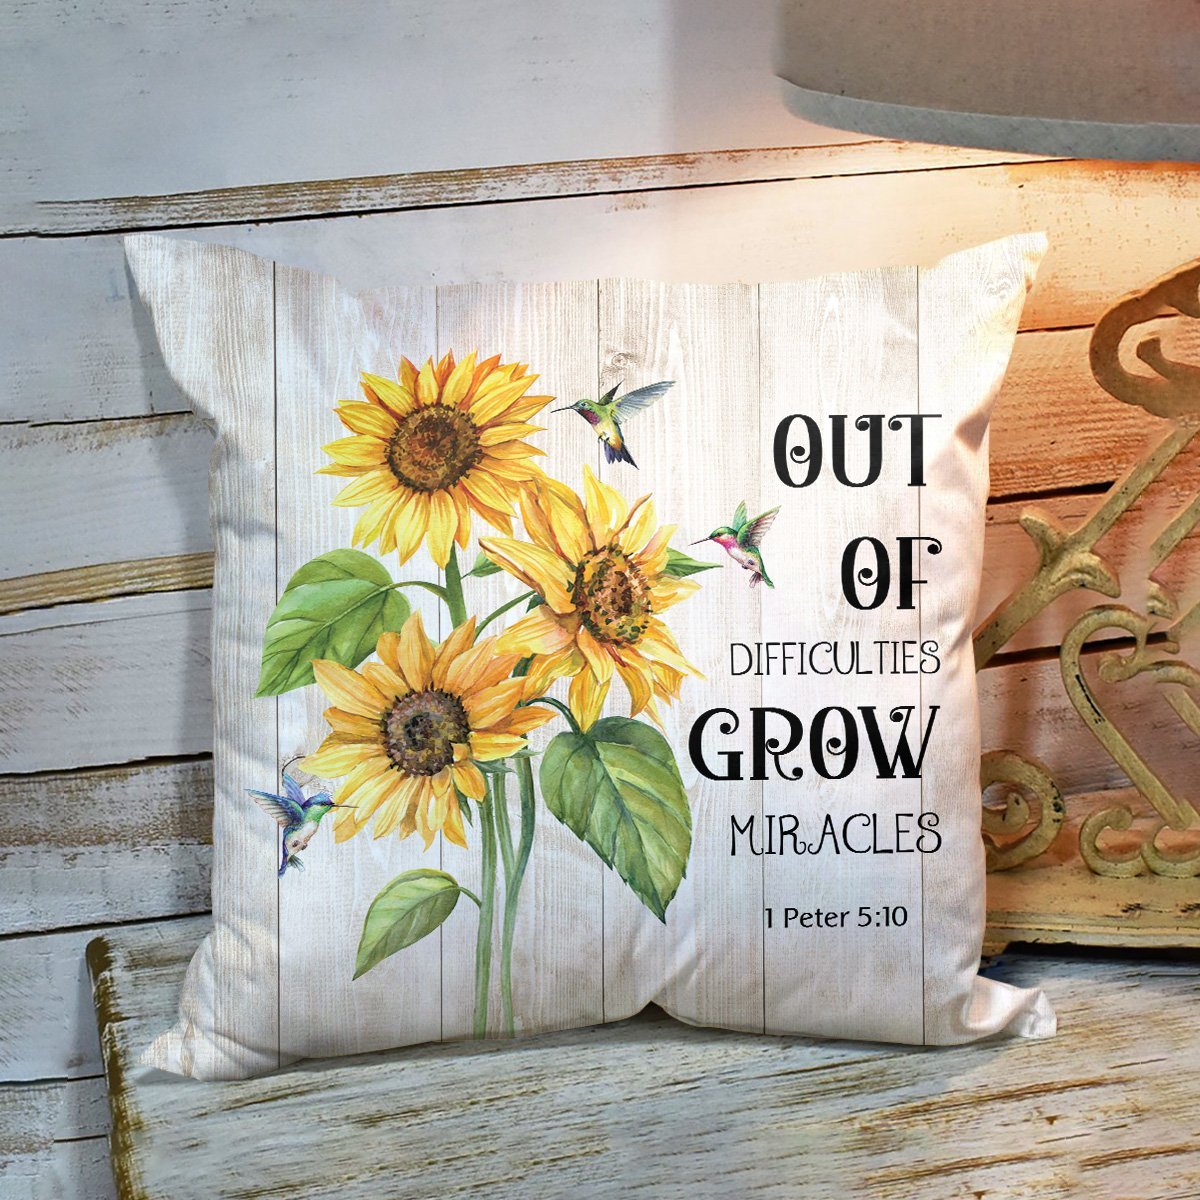 Out Of Difficulties Grow Miracles - Sunflower Pillowcase NUHN32 - 2